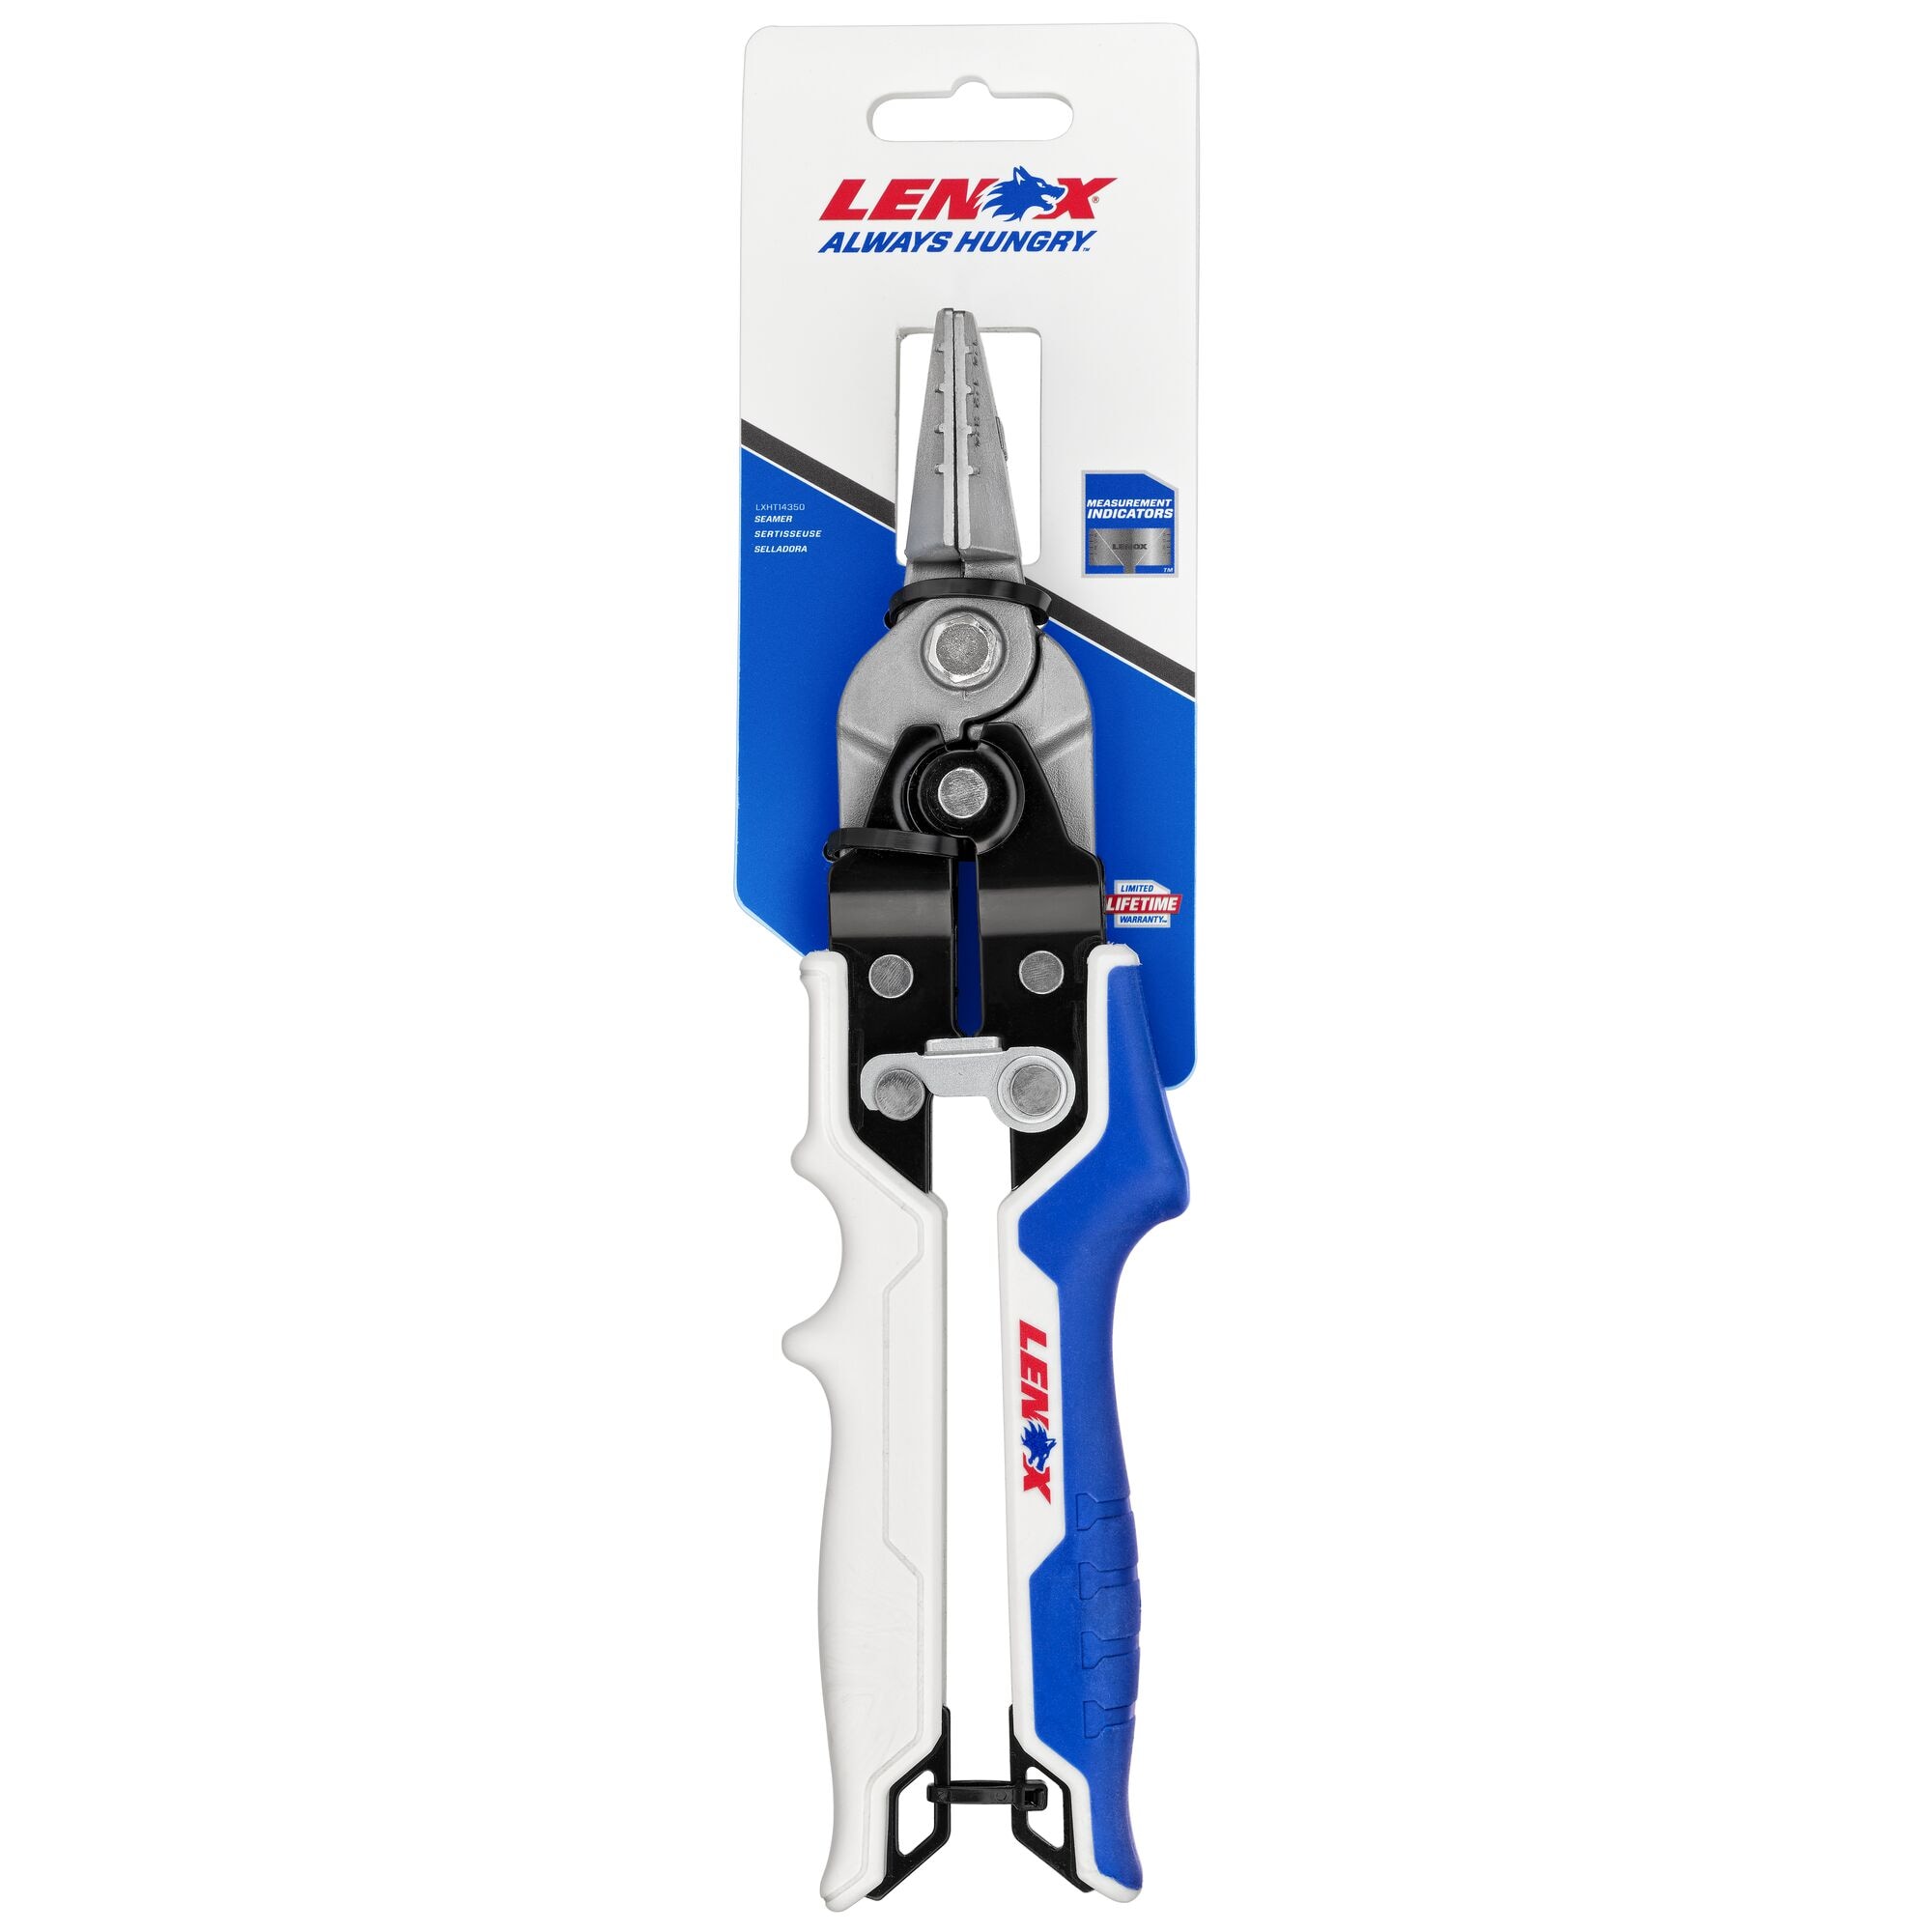 LENOX Forged Steel Snips in the department at Snips Tin